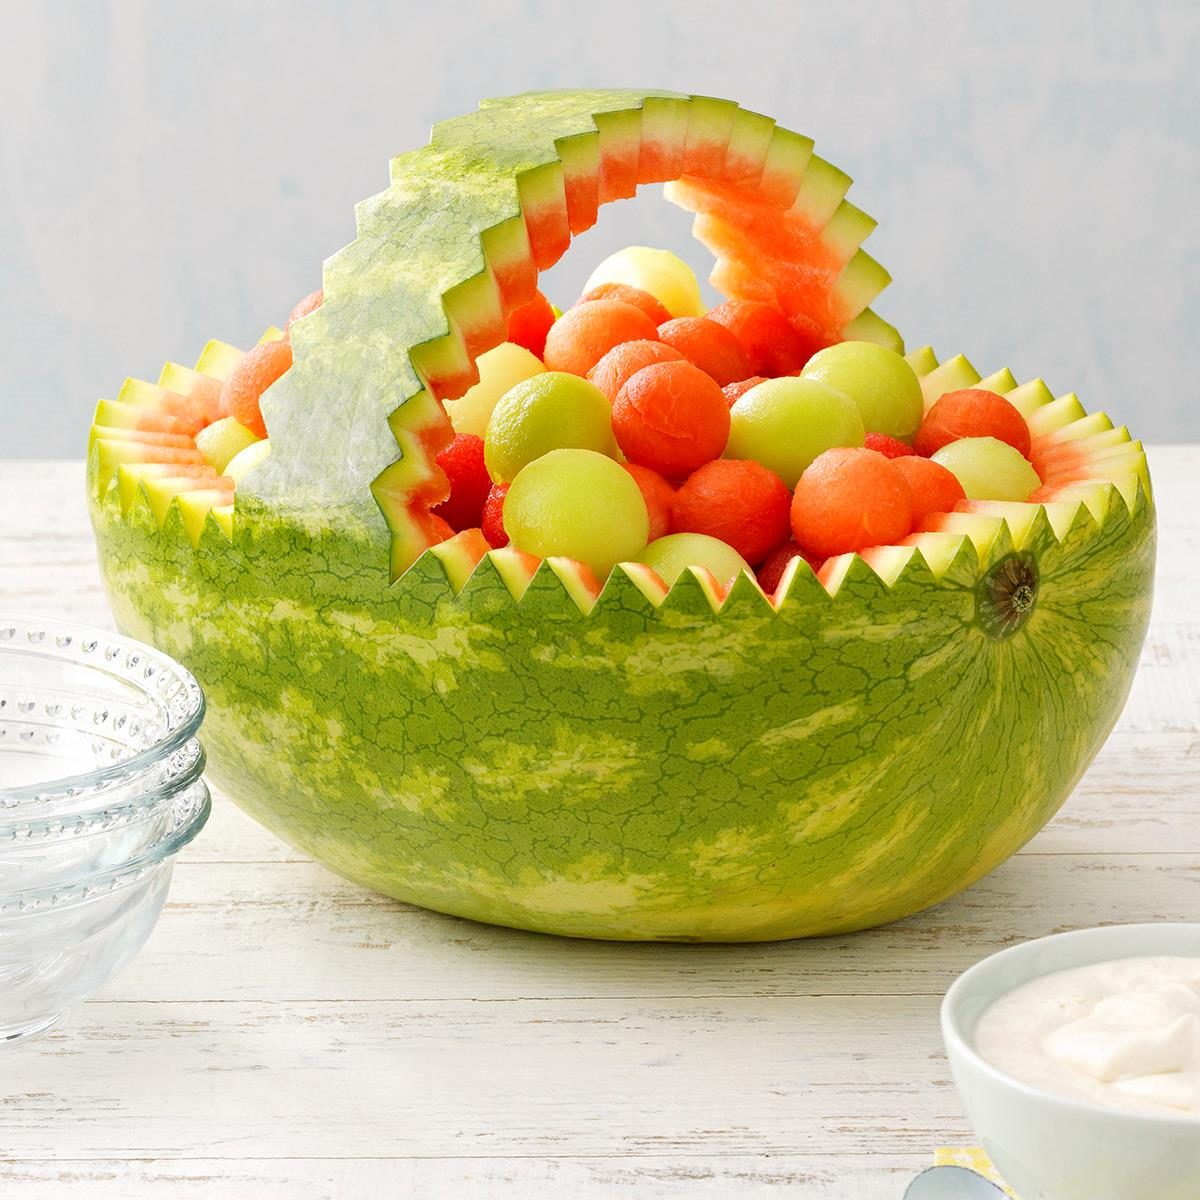 We Love a Melon Baller, and Not Just for Melons